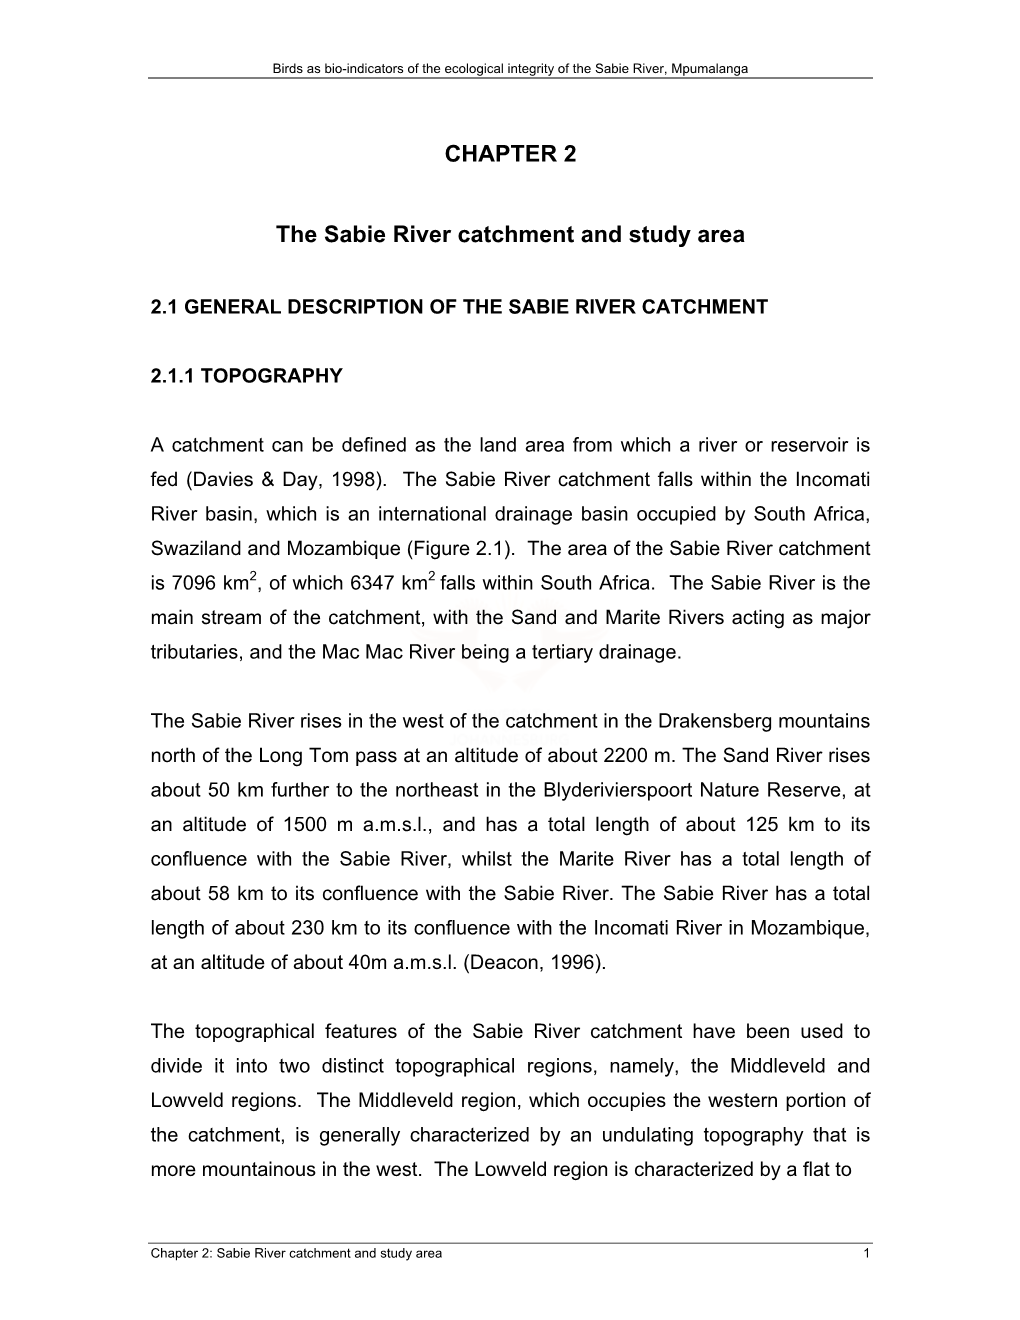 CHAPTER 2 the Sabie River Catchment and Study Area